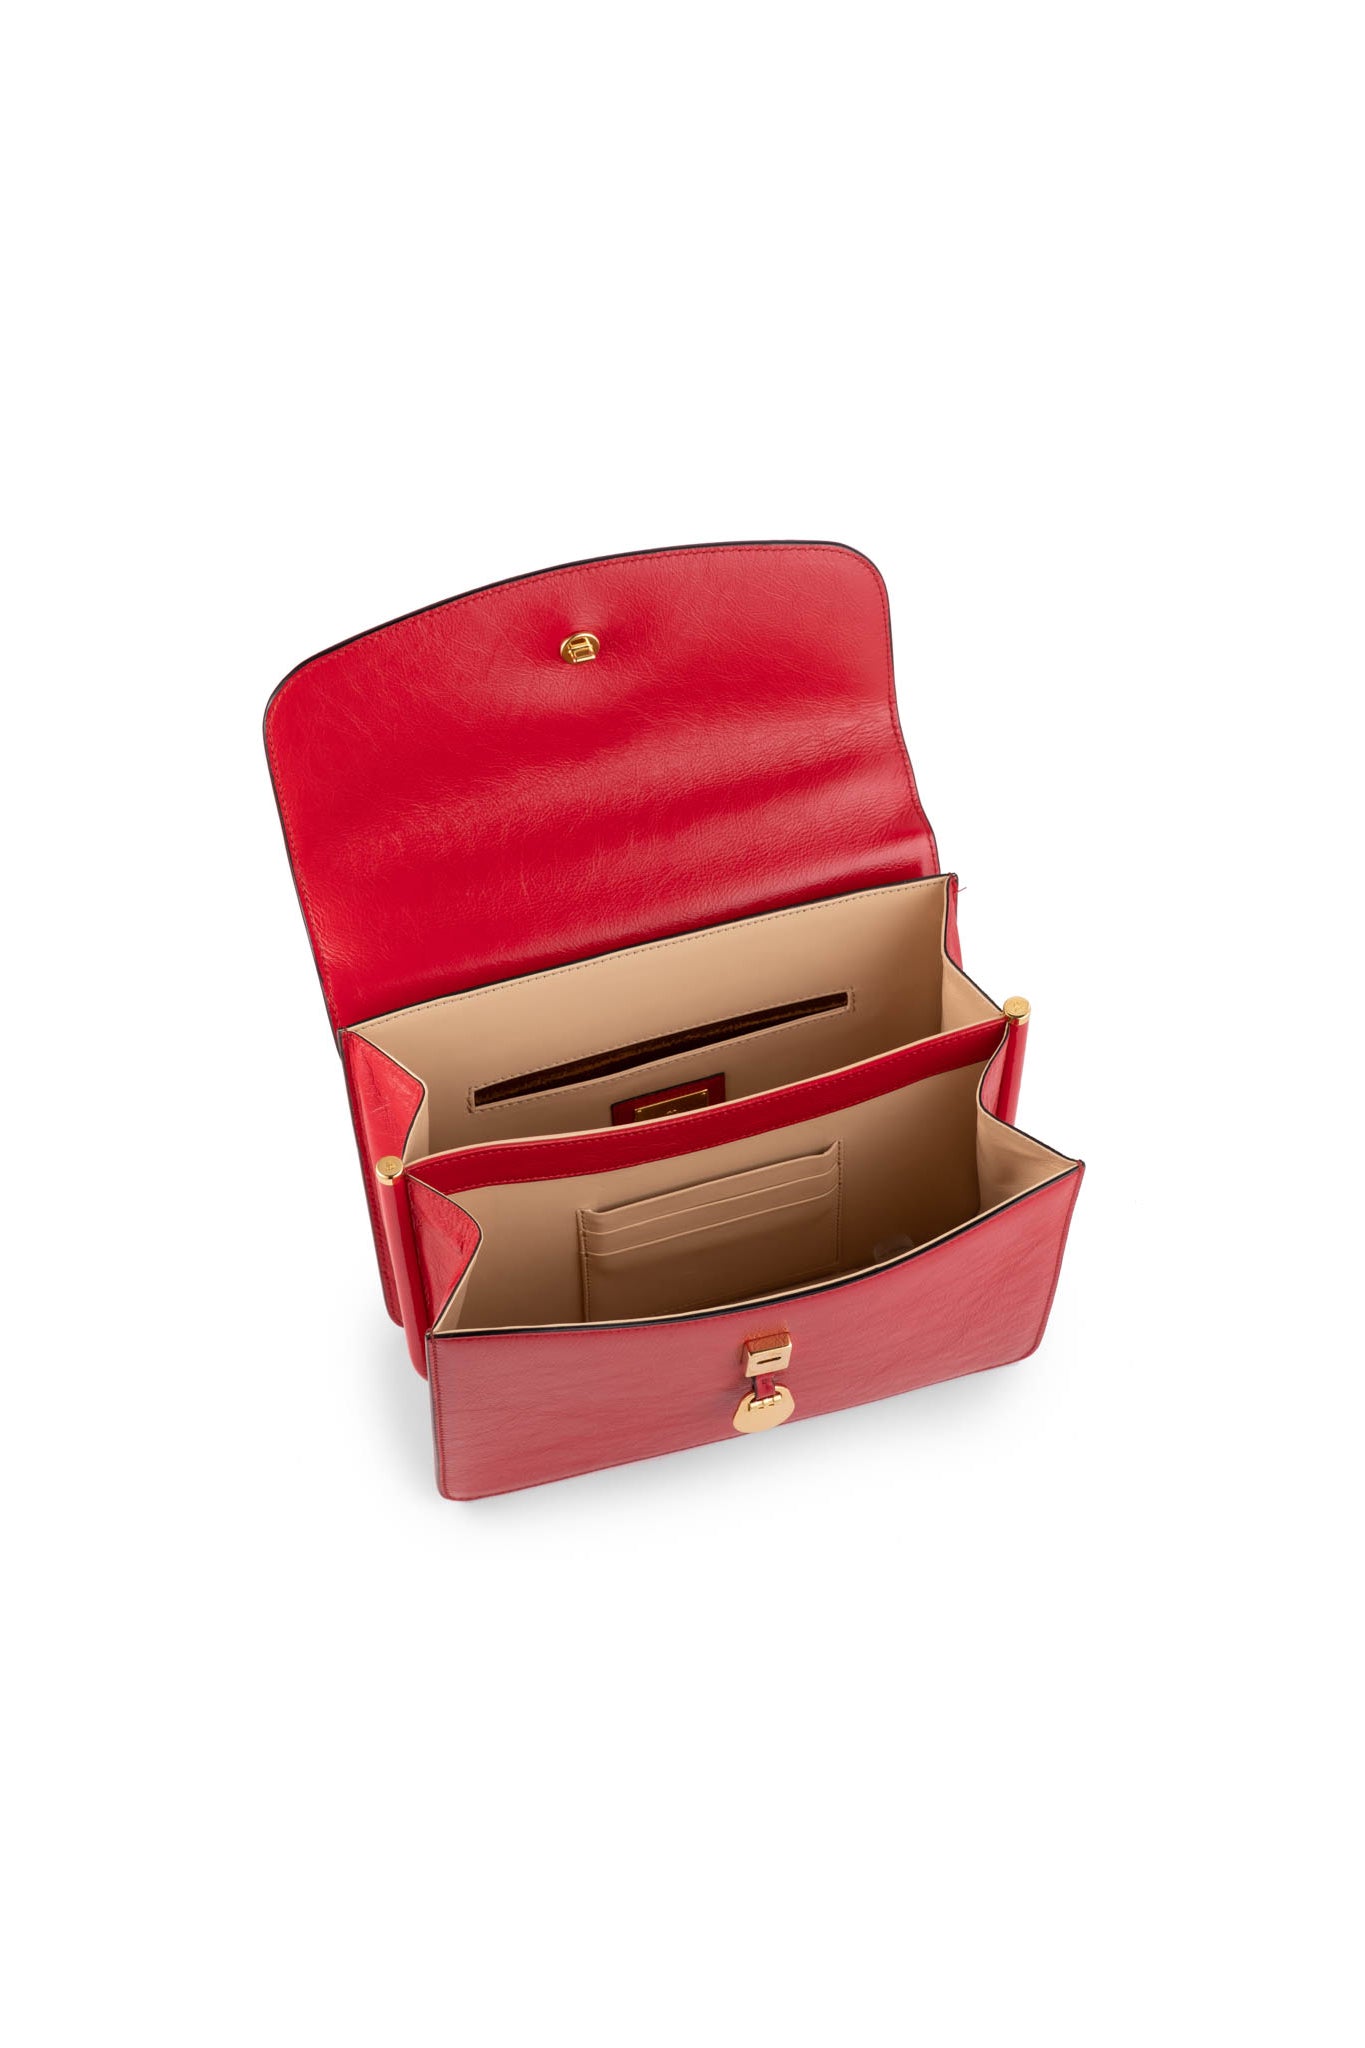 Charlie Top Handle Bag in Red Leather